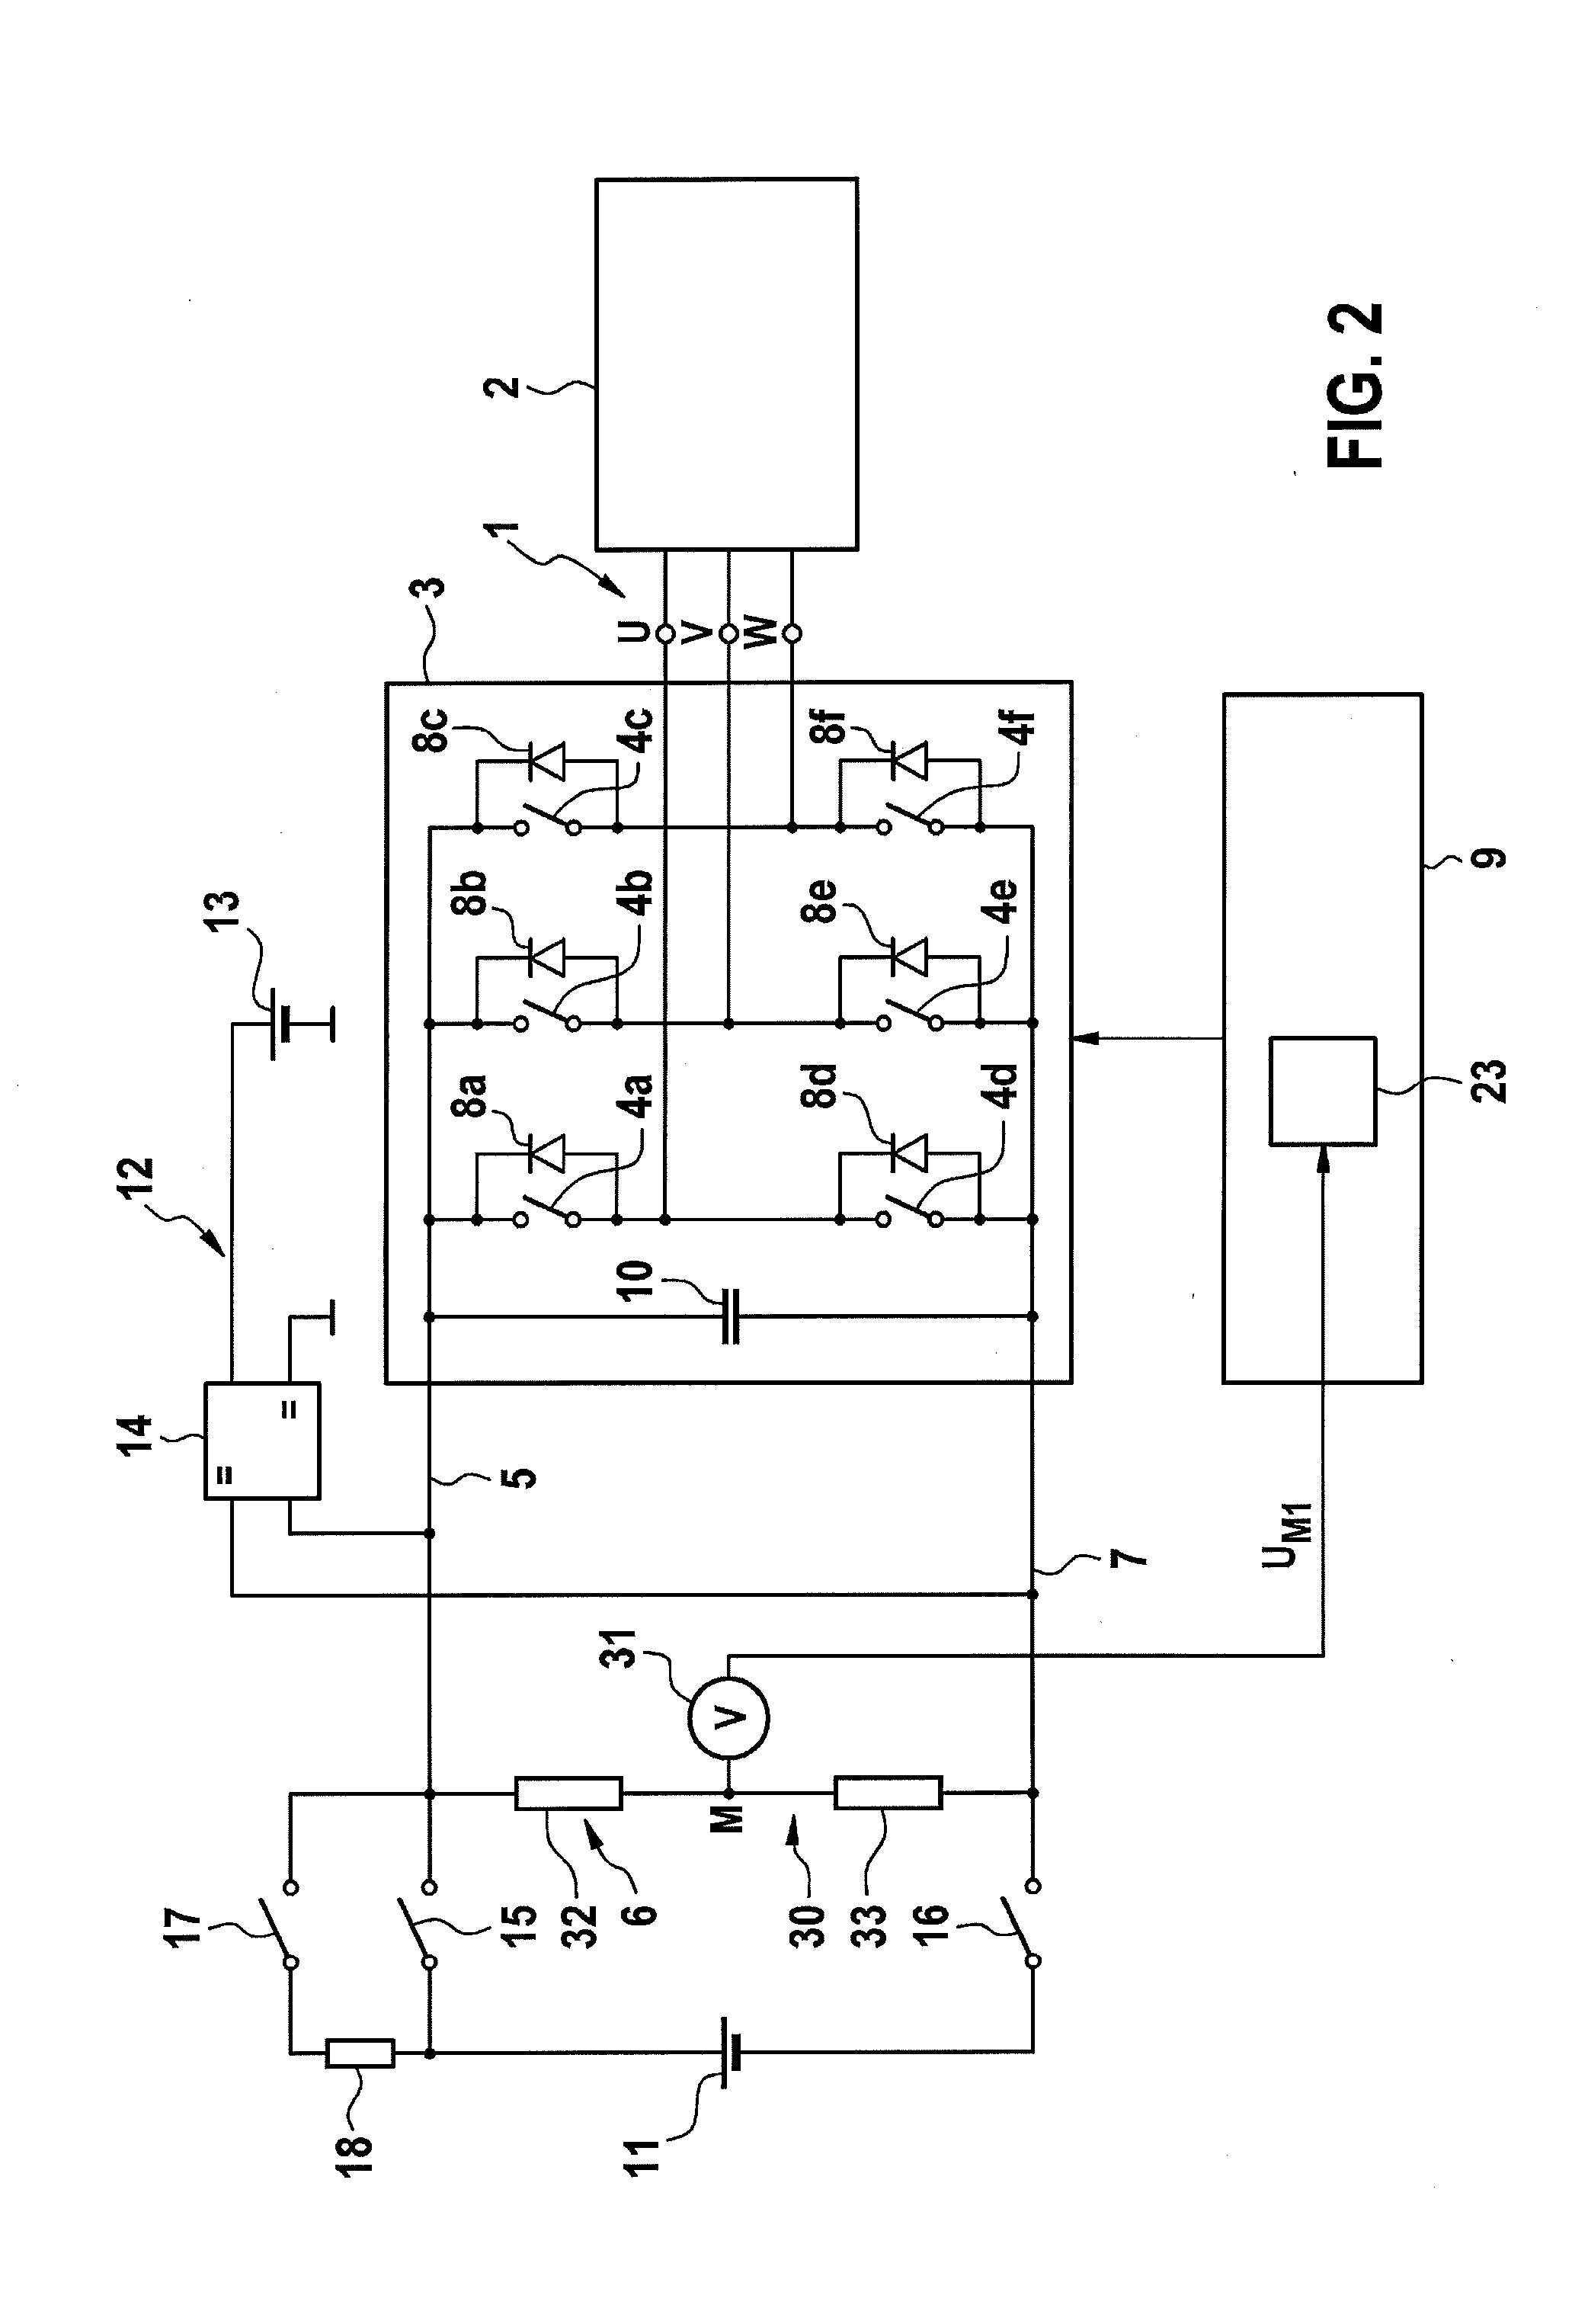 Method and device for monitoring the insulation resistance in an ungrounded electrical network